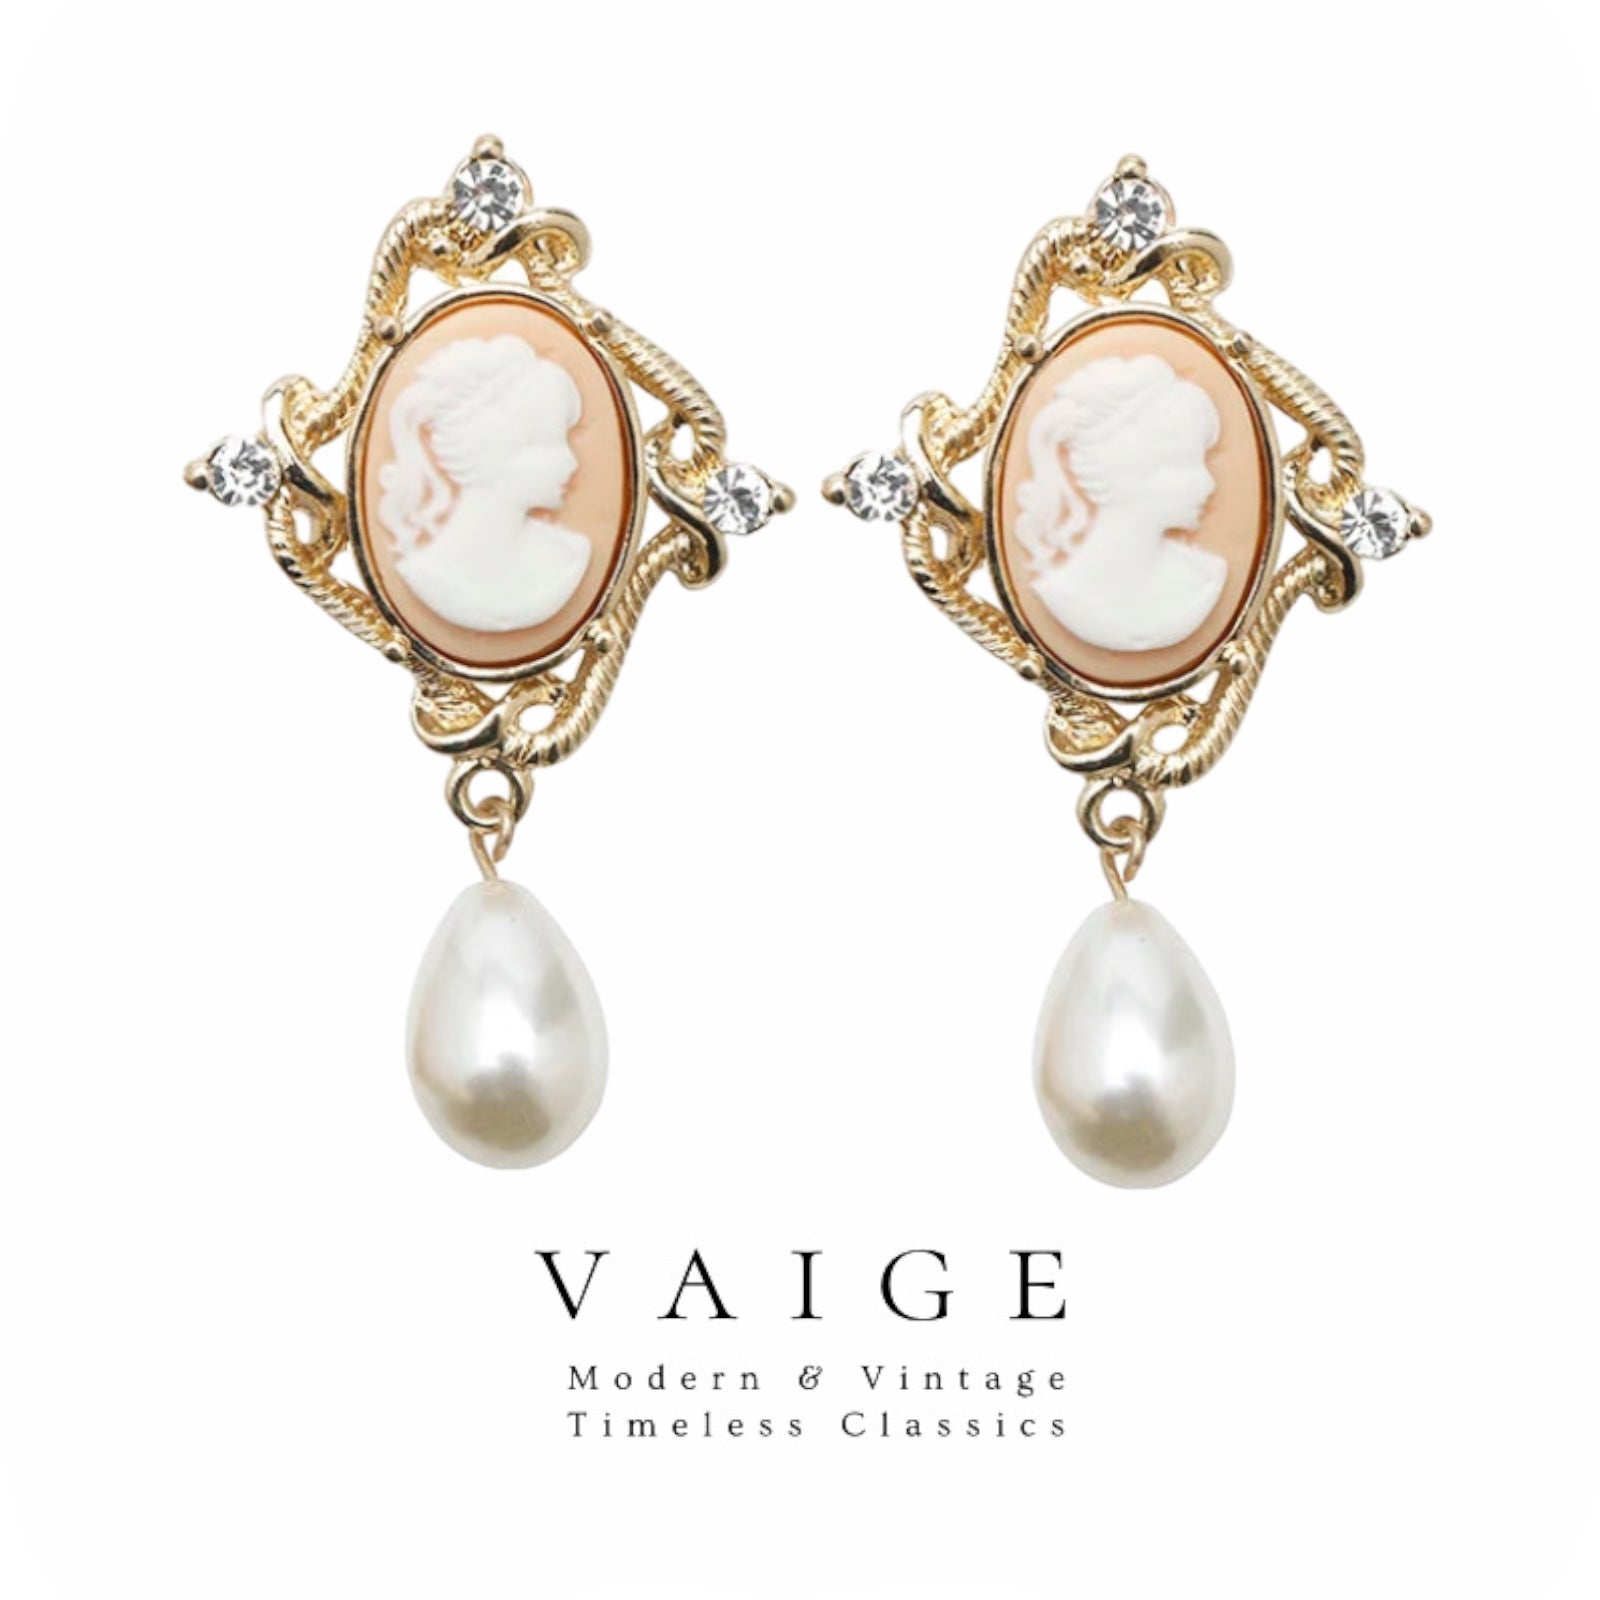 Pink Cameo Lady Dangle Gold Pearl Earrings